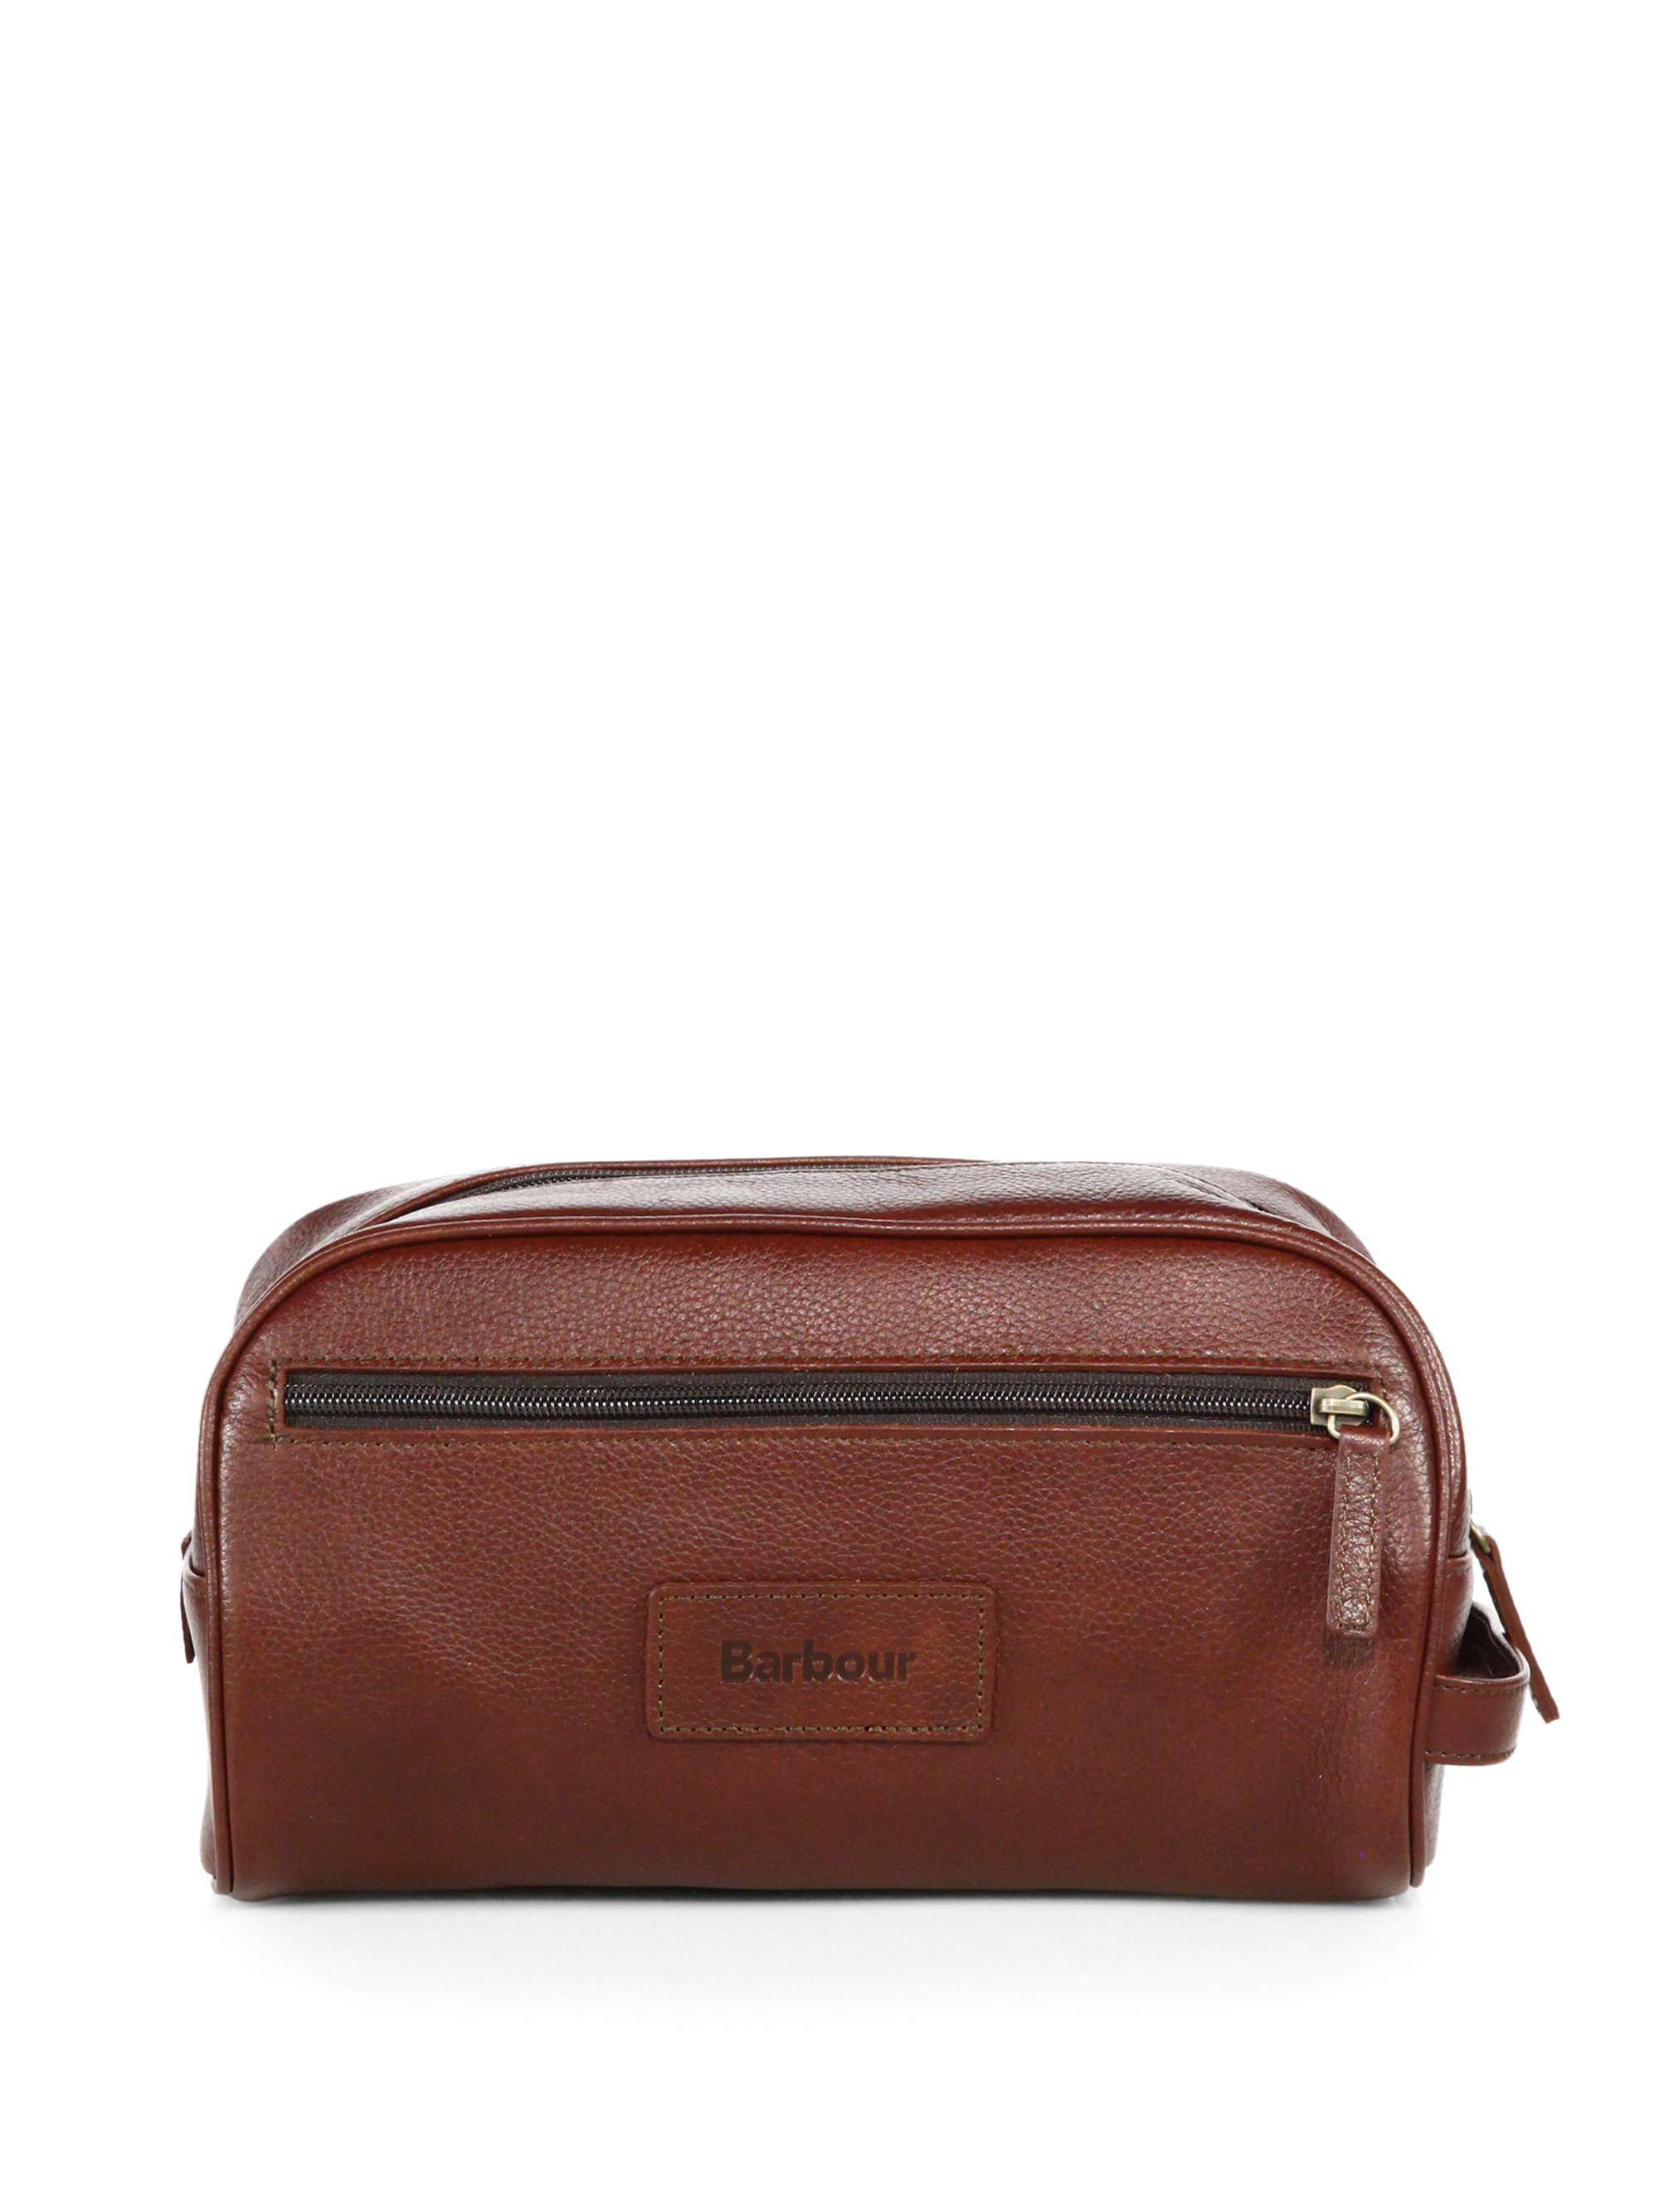 Lyst - Barbour Leather Wash Bag in Brown for Men